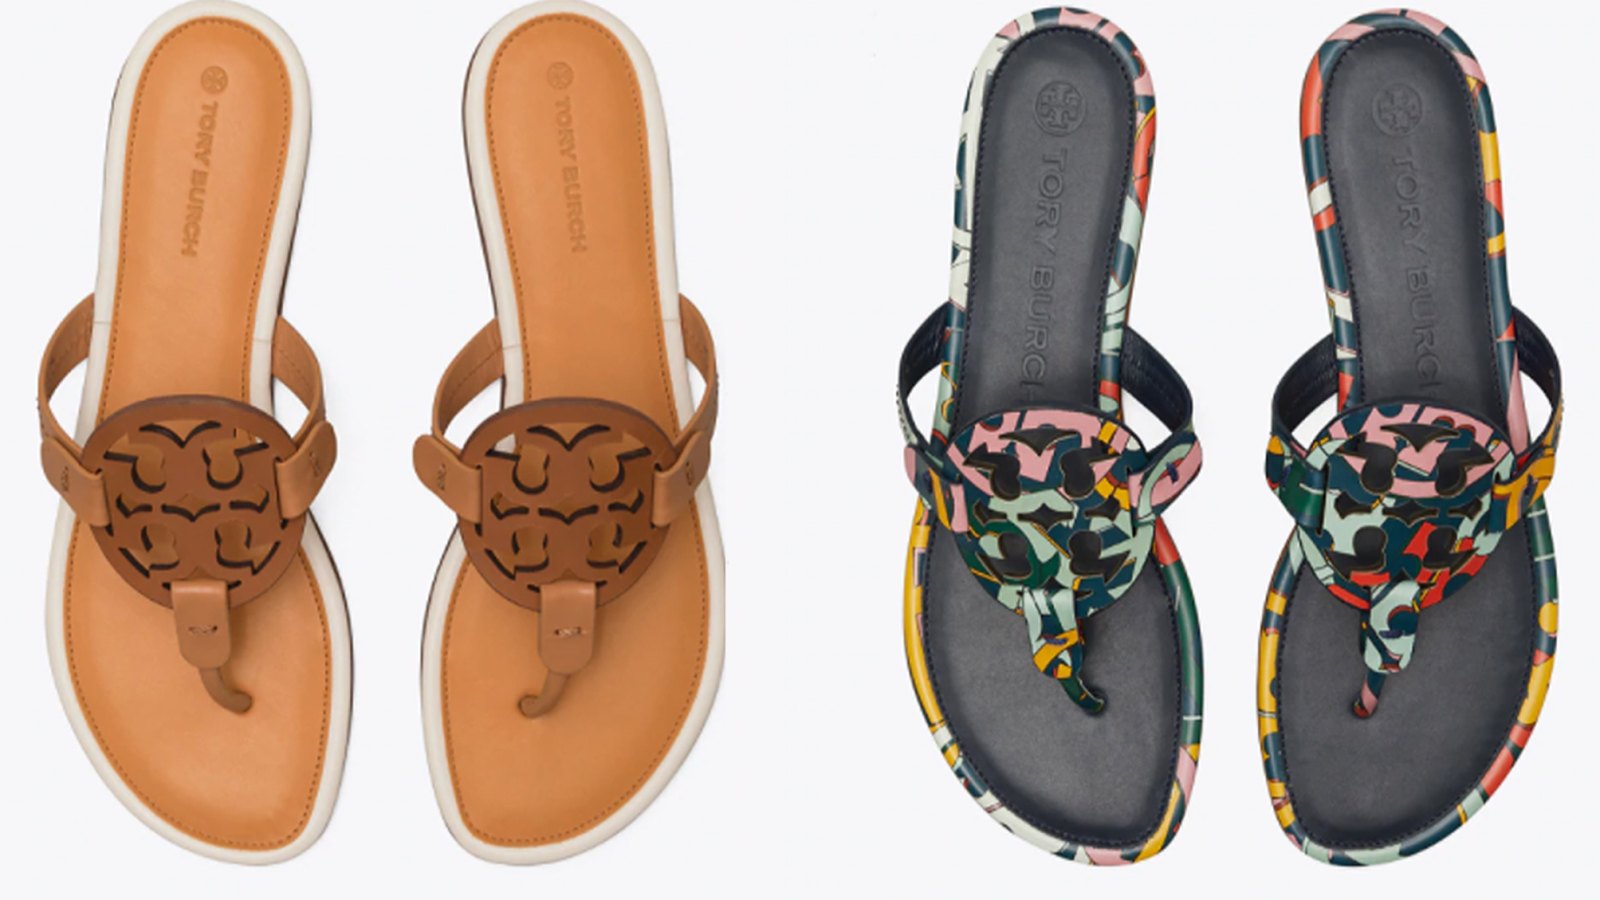 Tory Burch Fall Event: Get $100+ off 2 Pairs of Miller Sandals | Us Weekly